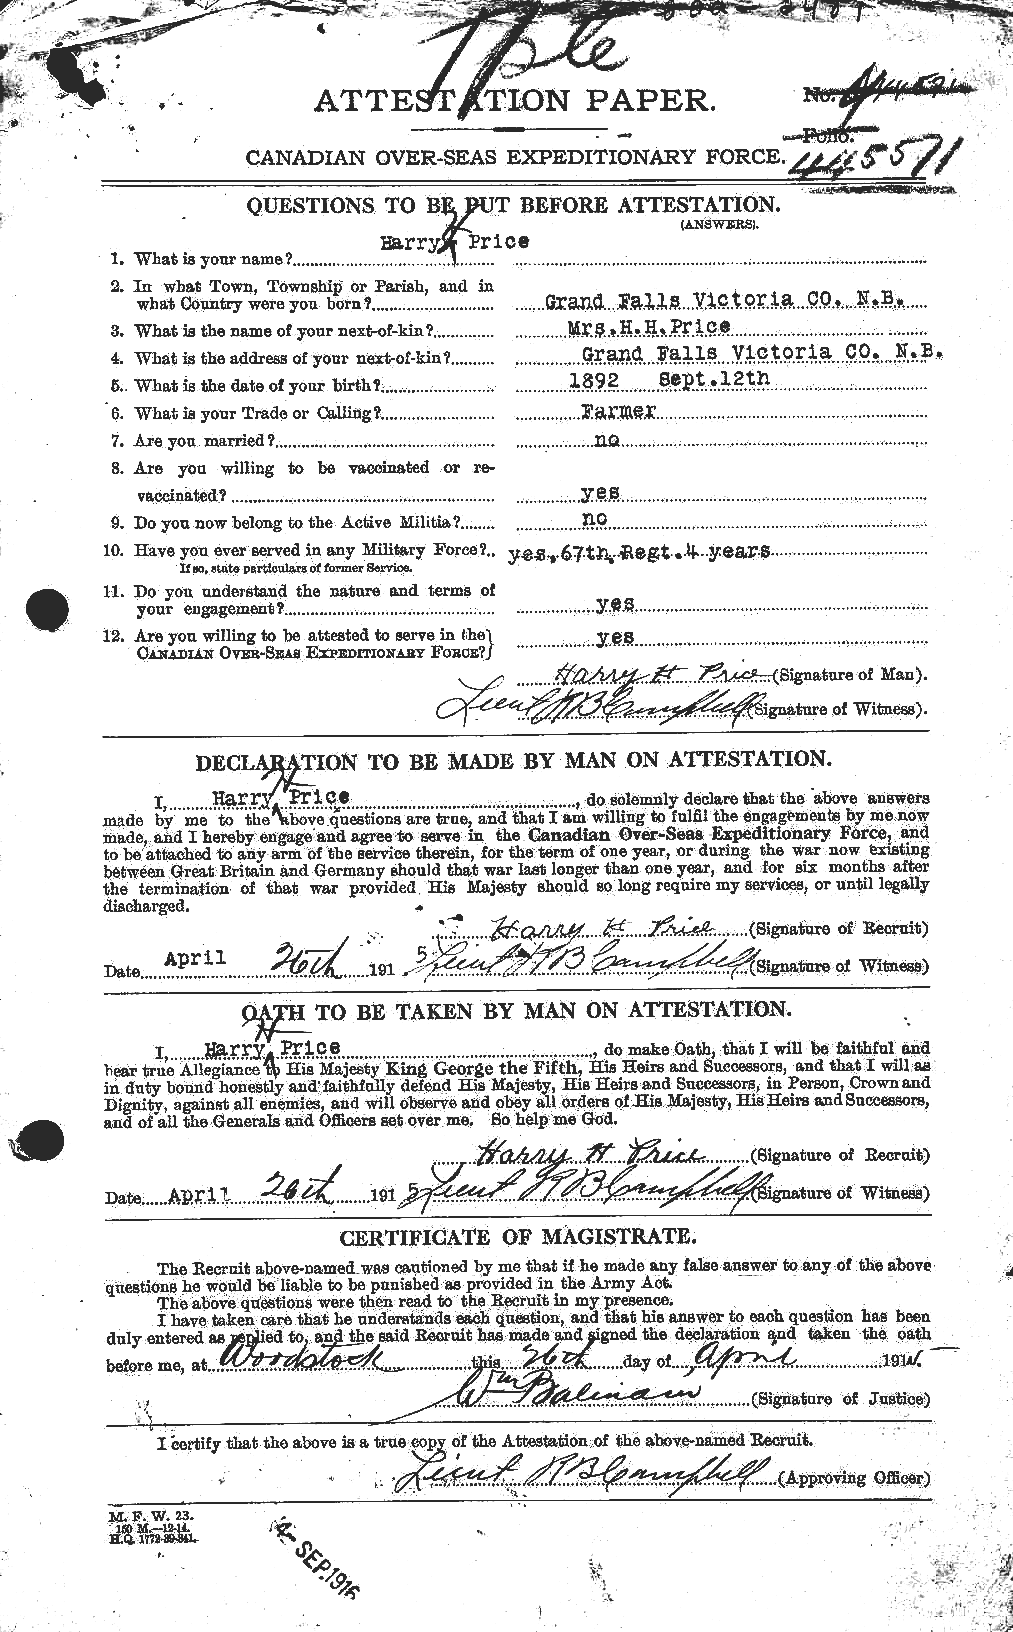 Personnel Records of the First World War - CEF 587142a